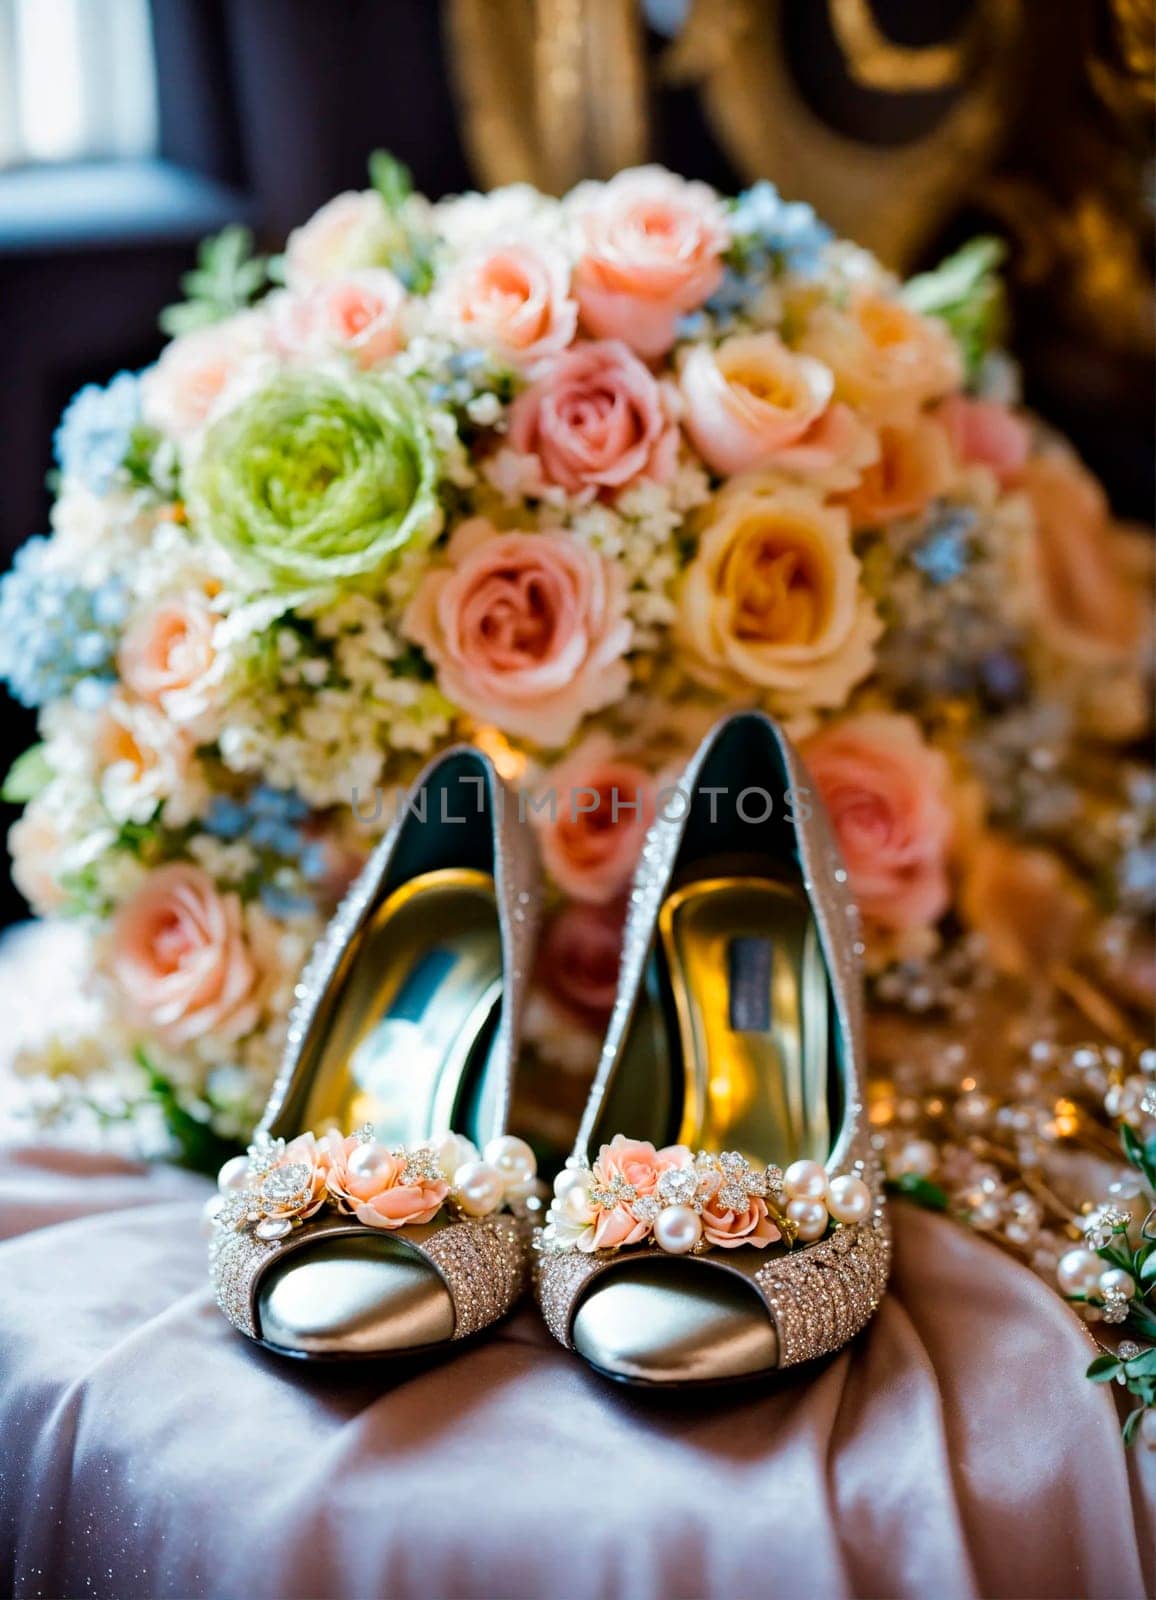 wedding shoes and accessories. Selective focus. by yanadjana